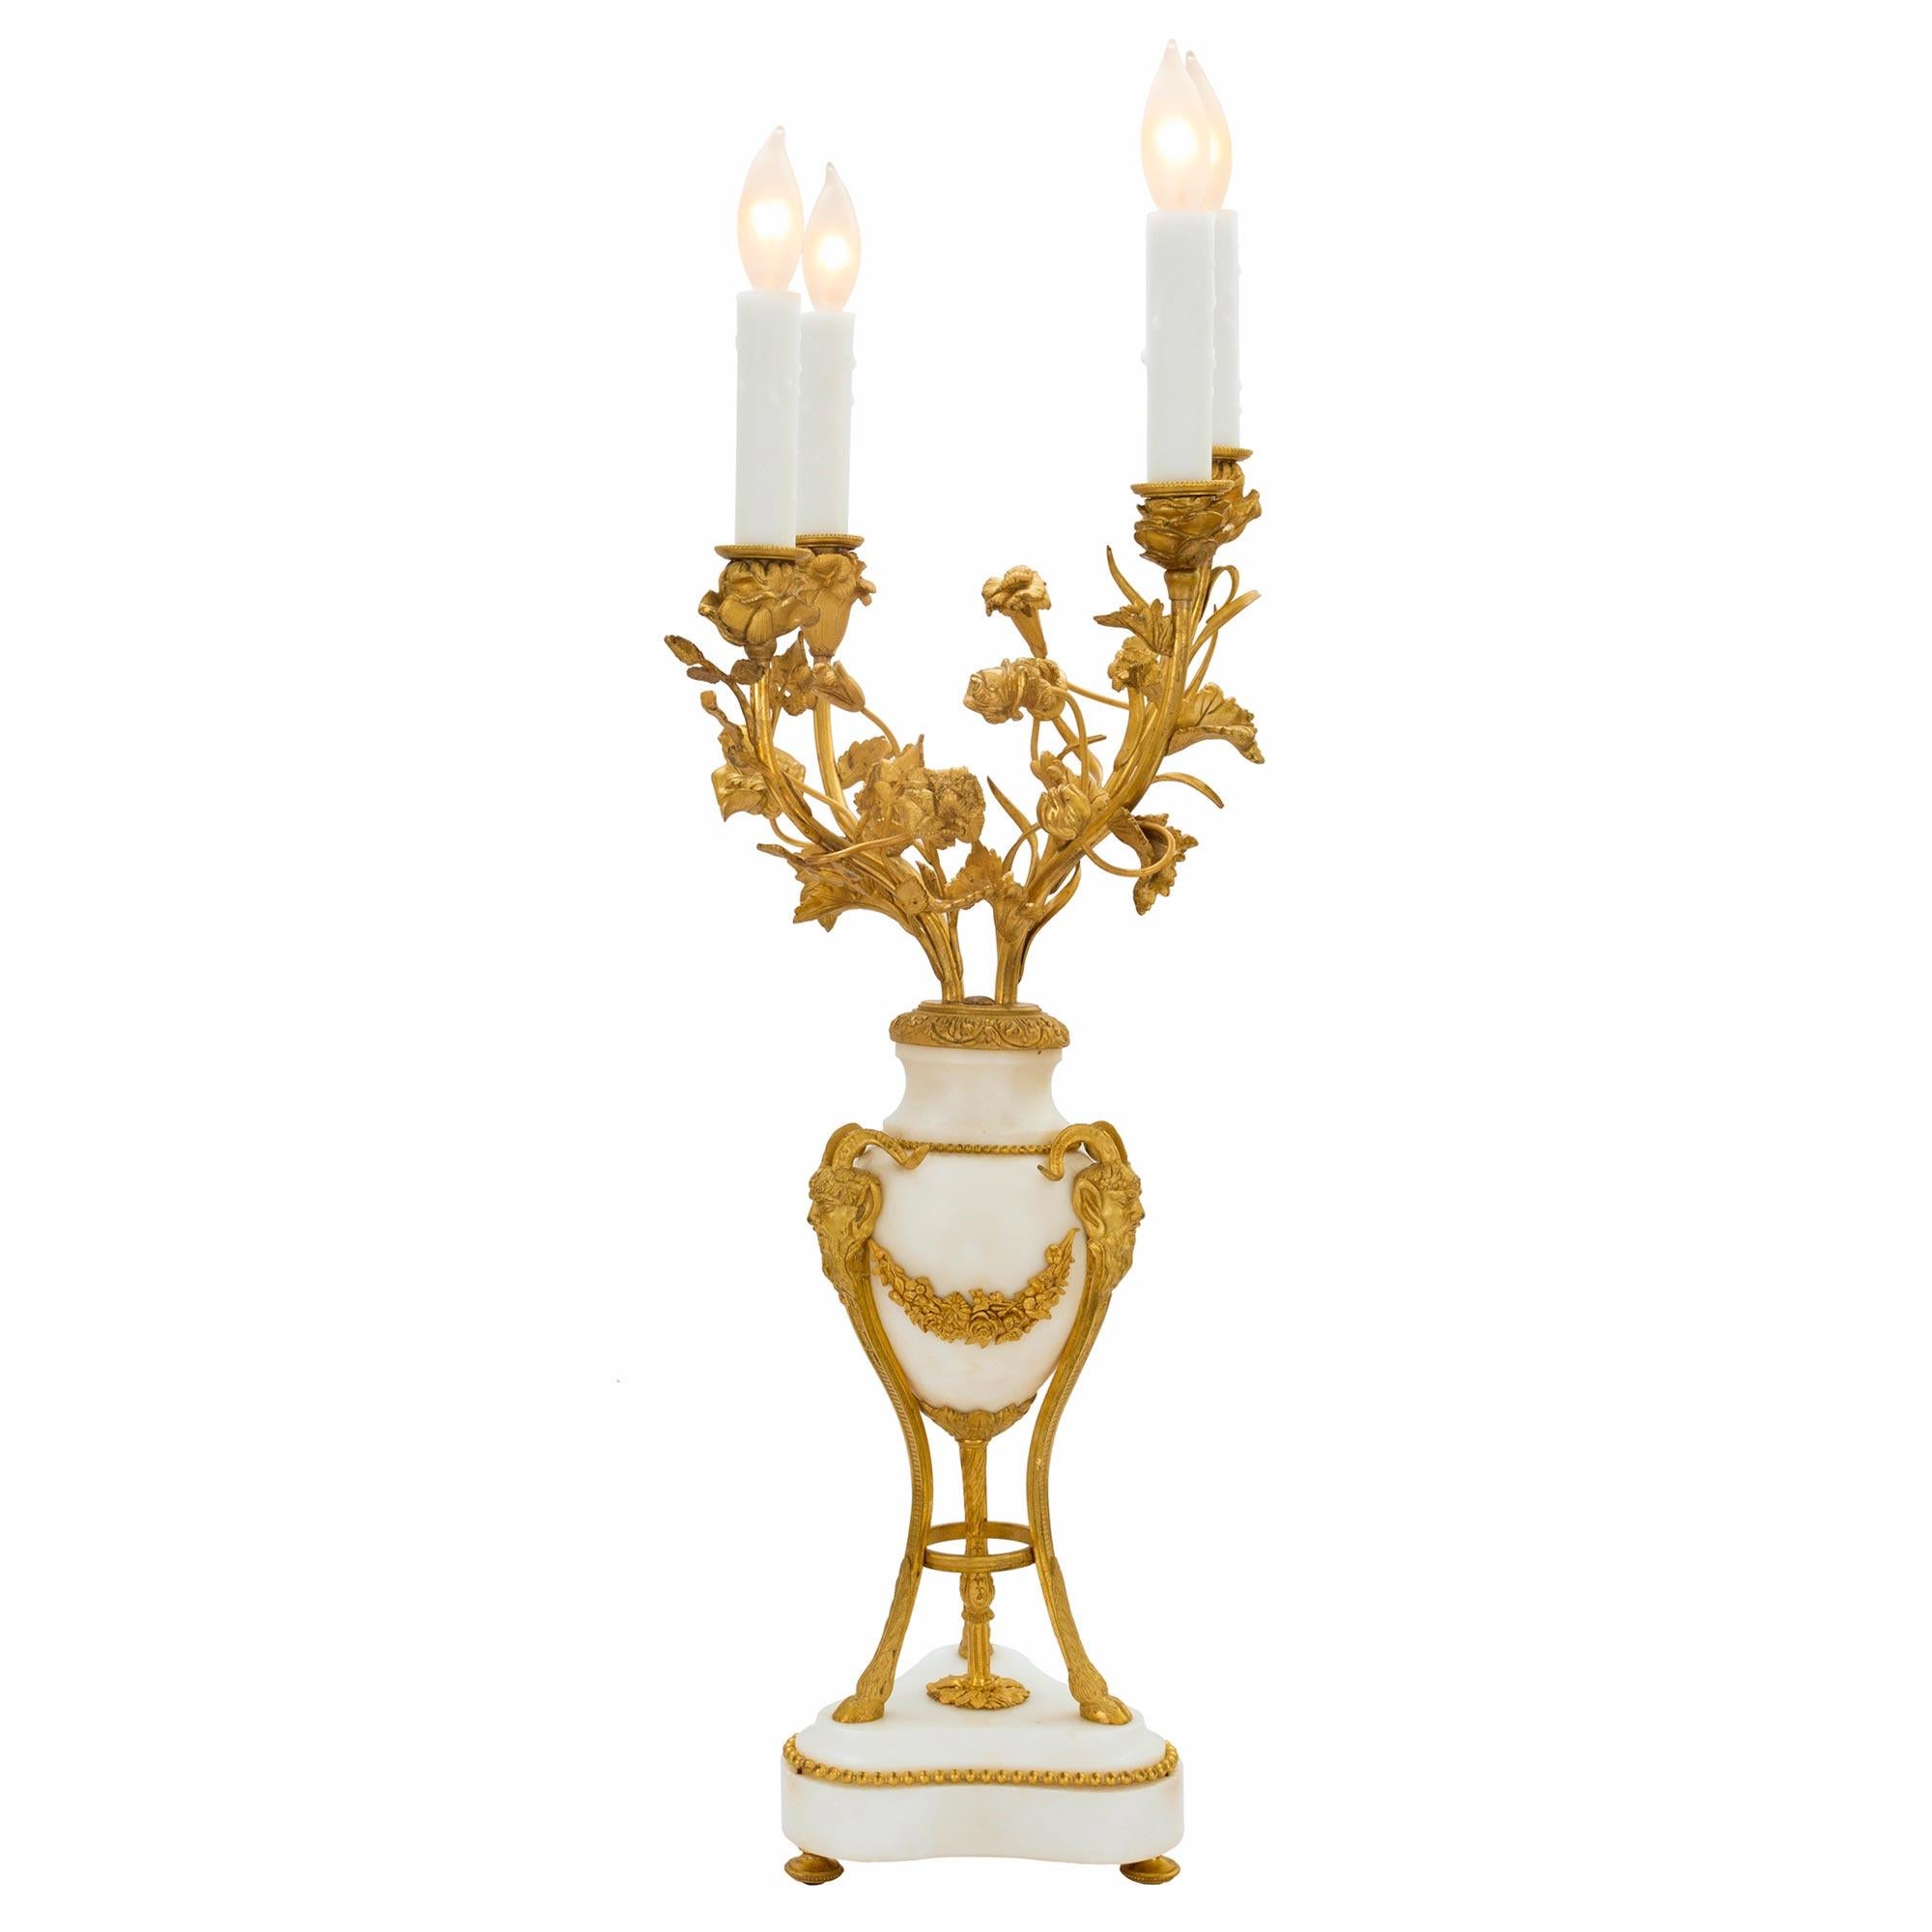 A handsome pair of French mid 19th century Louis XVI st. white Carrara marble and ormolu electrified candelabras. Each are raised by a Carrara marble base with canted corners on ormolu topie supports and ormolu beaded border. Three ormolu supports